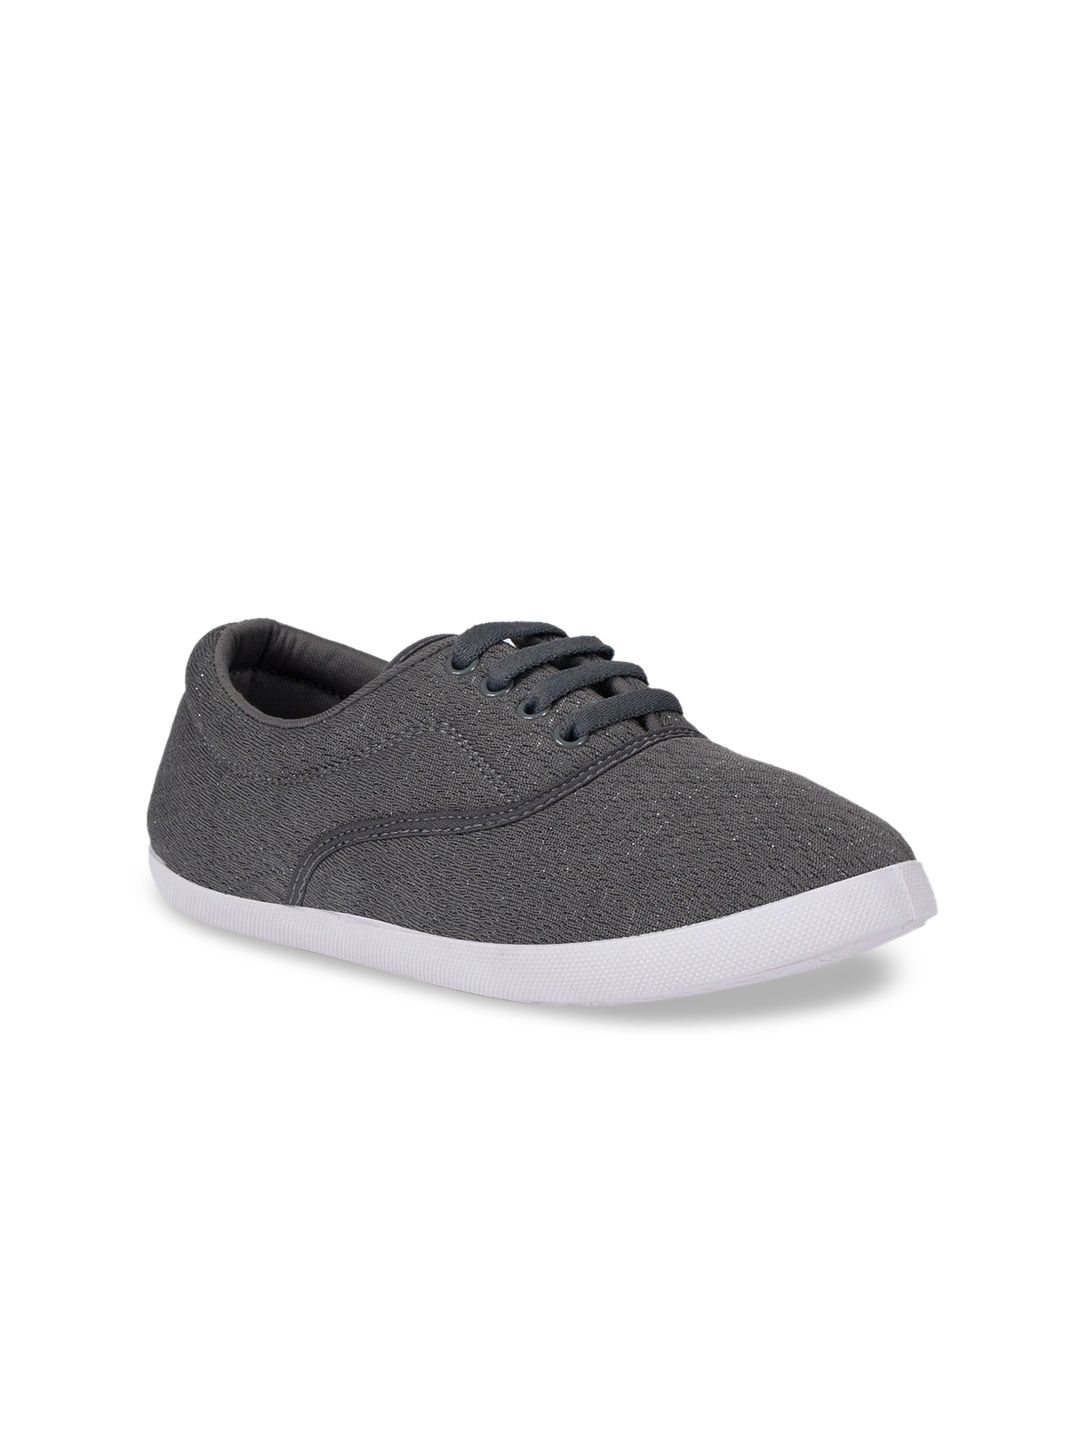 ASIAN Women Charcoal Sneakers Price in India